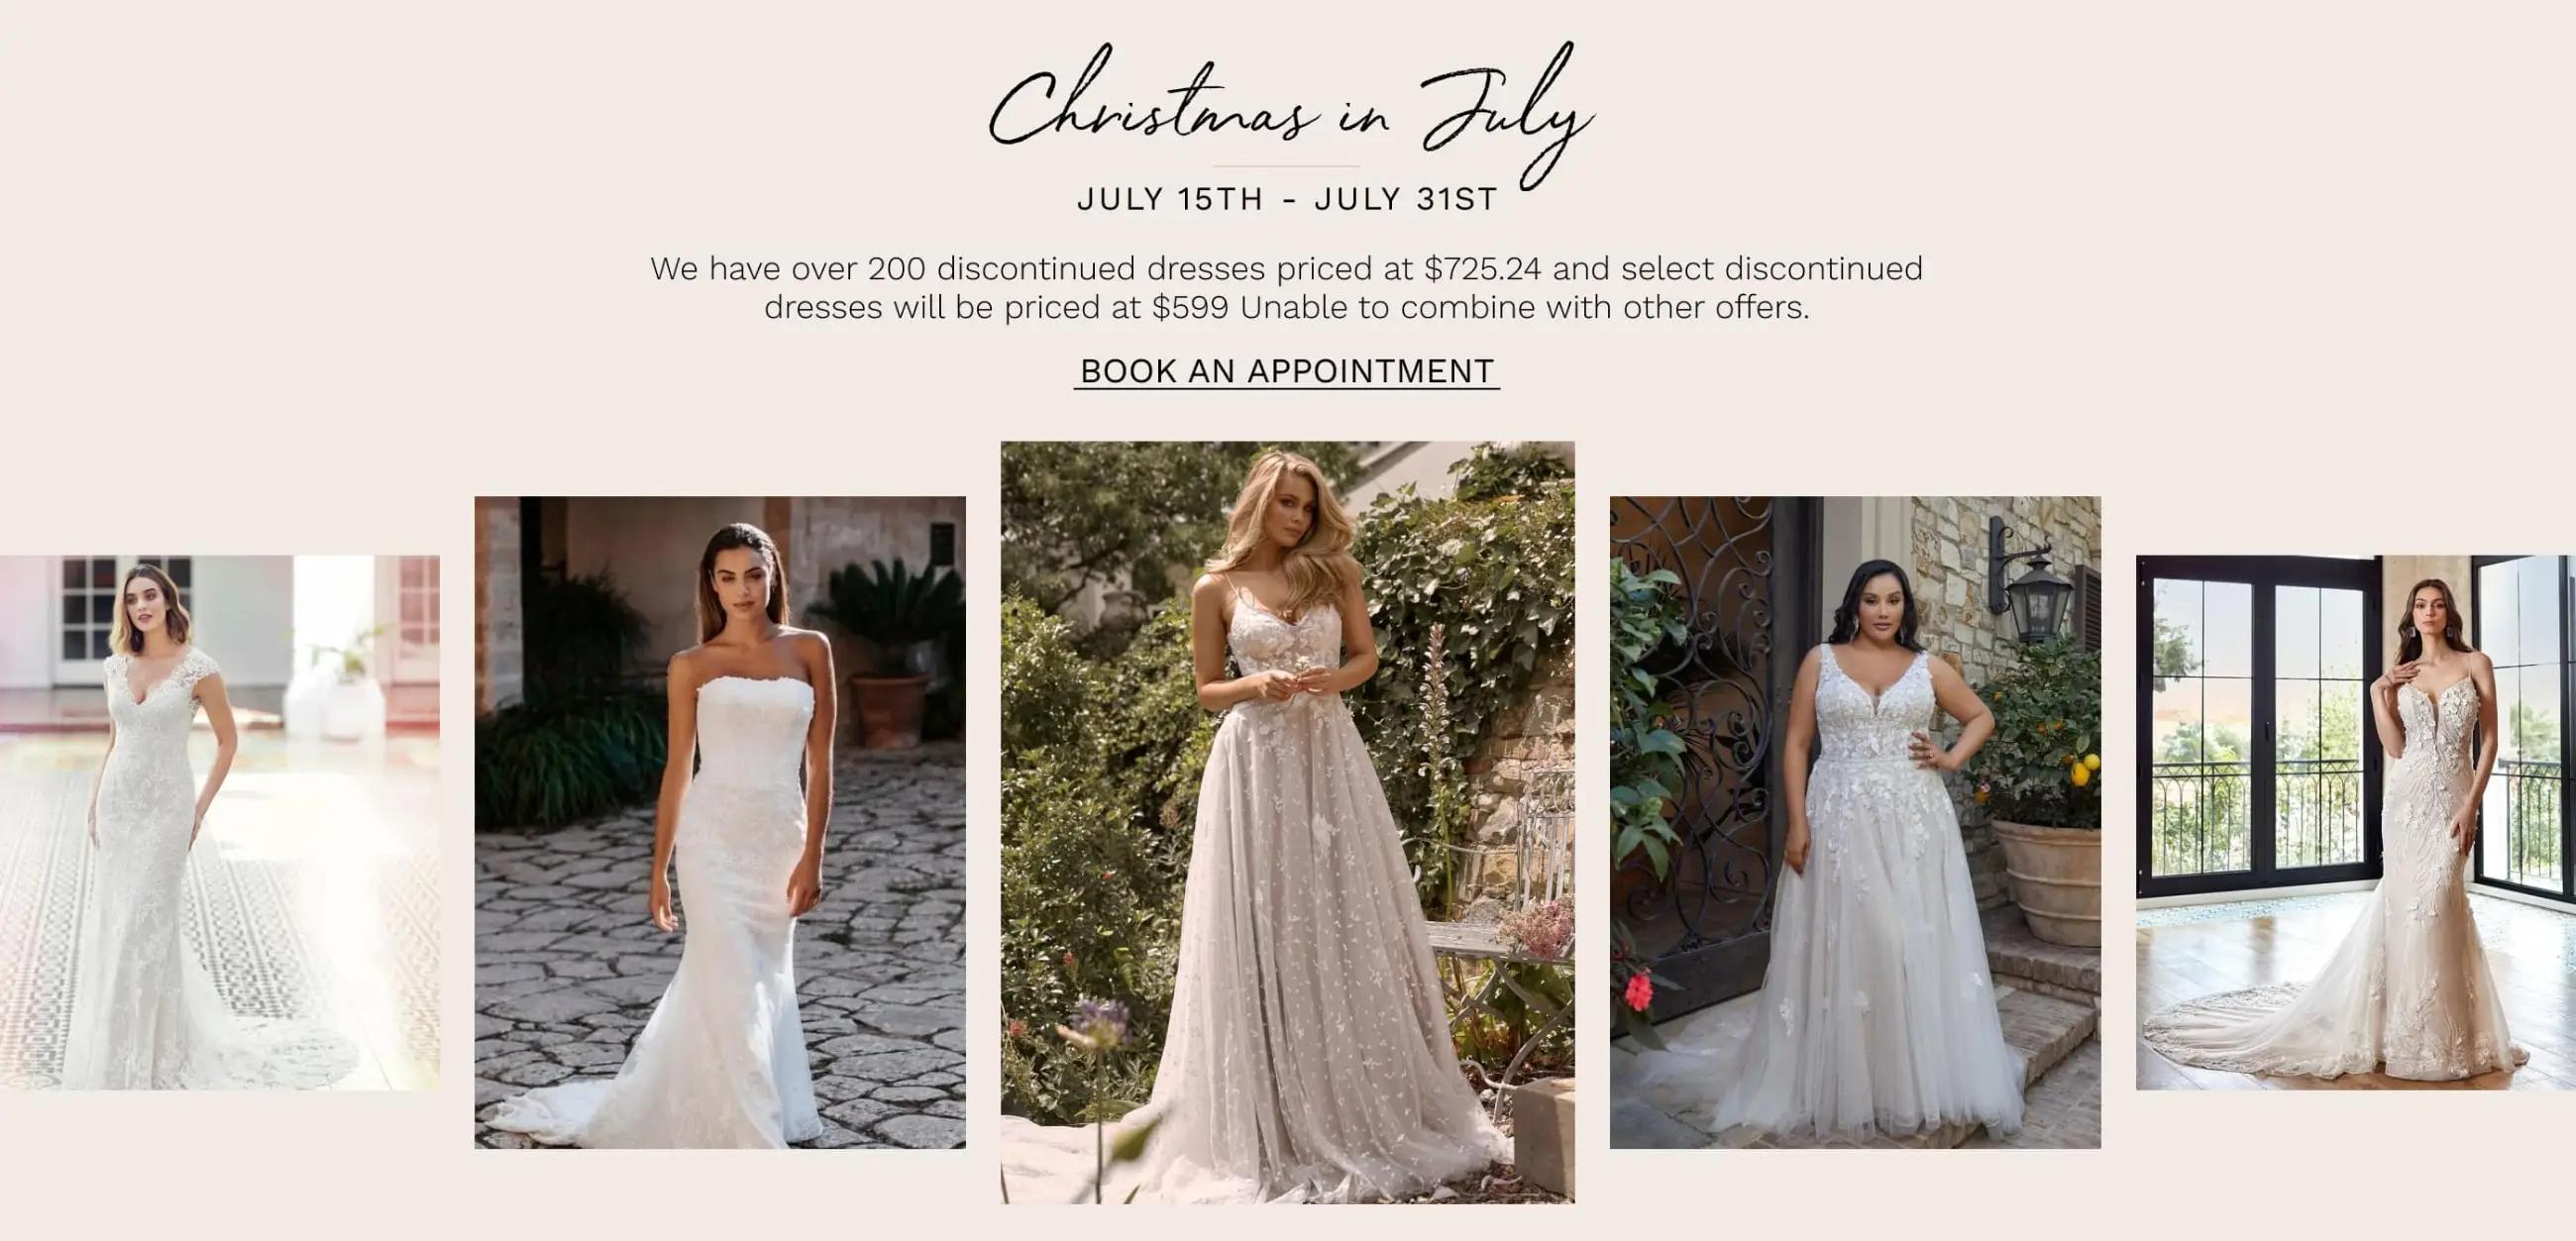 Christmas in July sale at Dublin Bridal